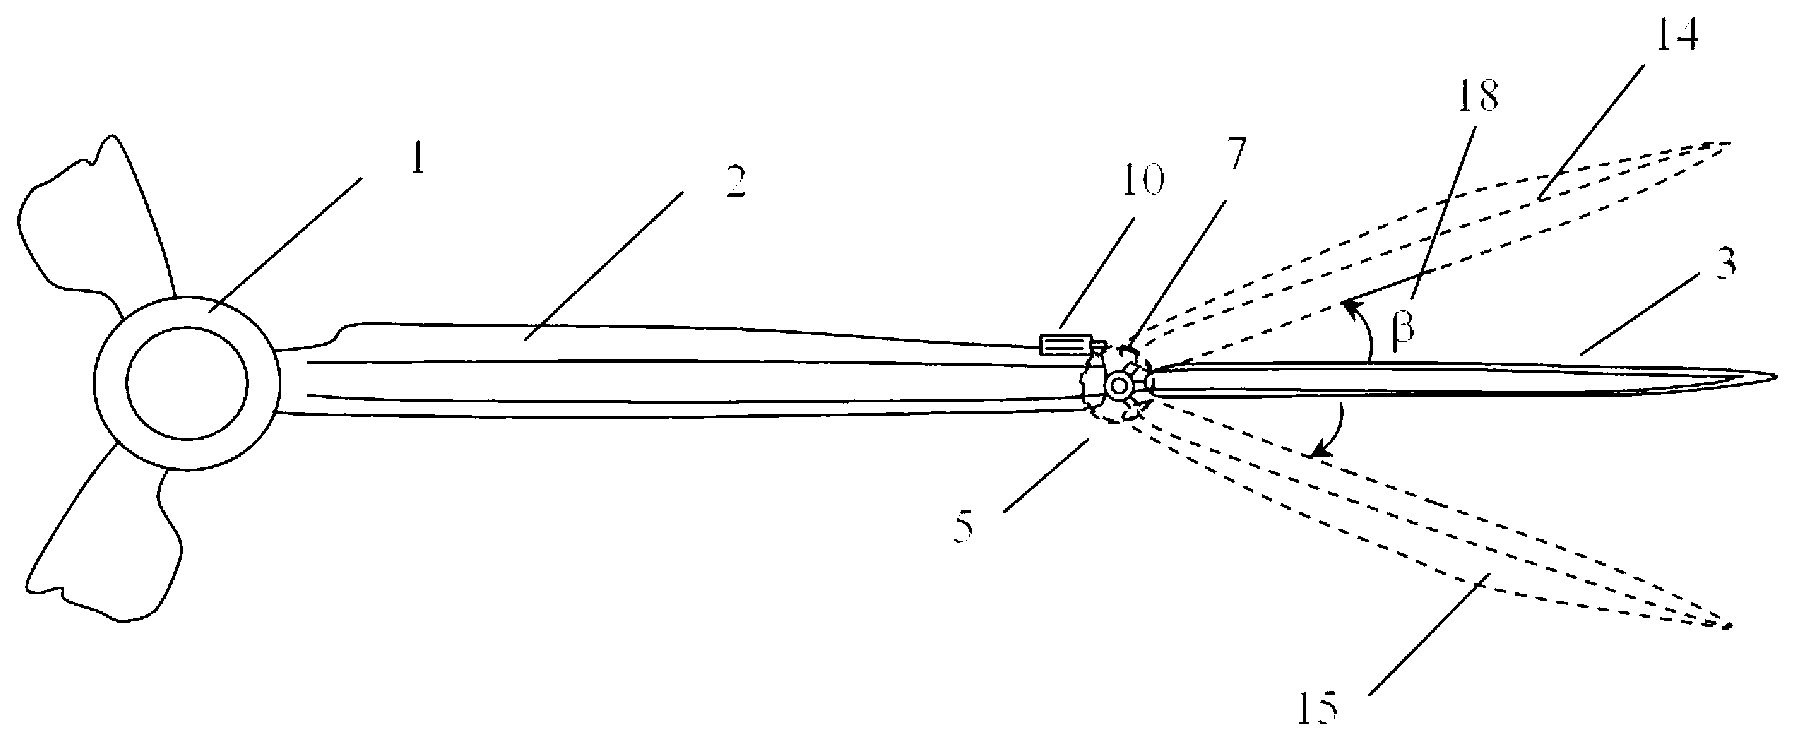 Two-sectional inclined folding blade device for large wind-driven generator